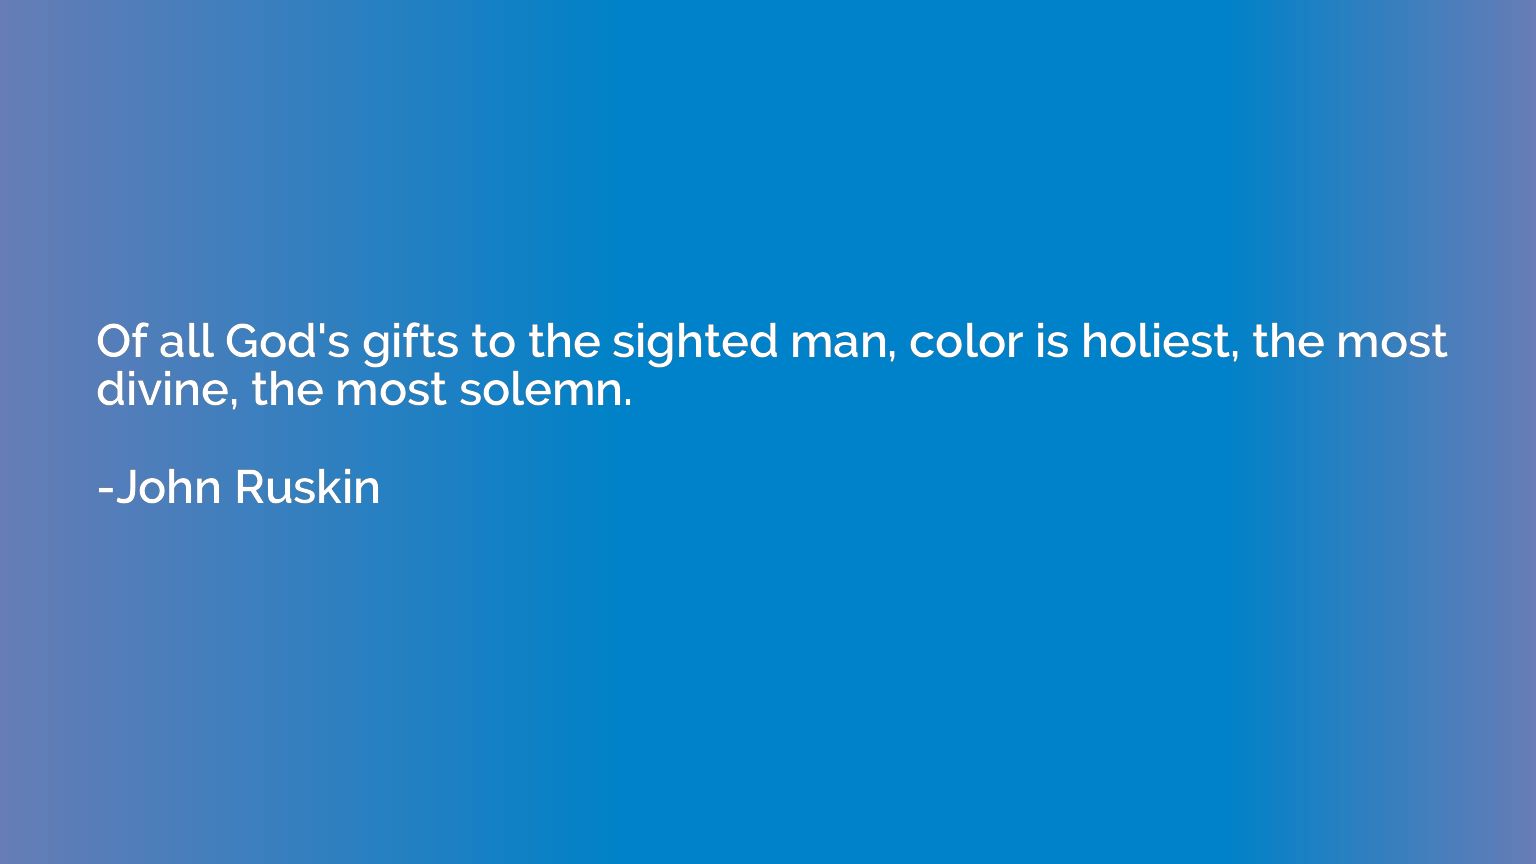 Of all God's gifts to the sighted man, color is holiest, the